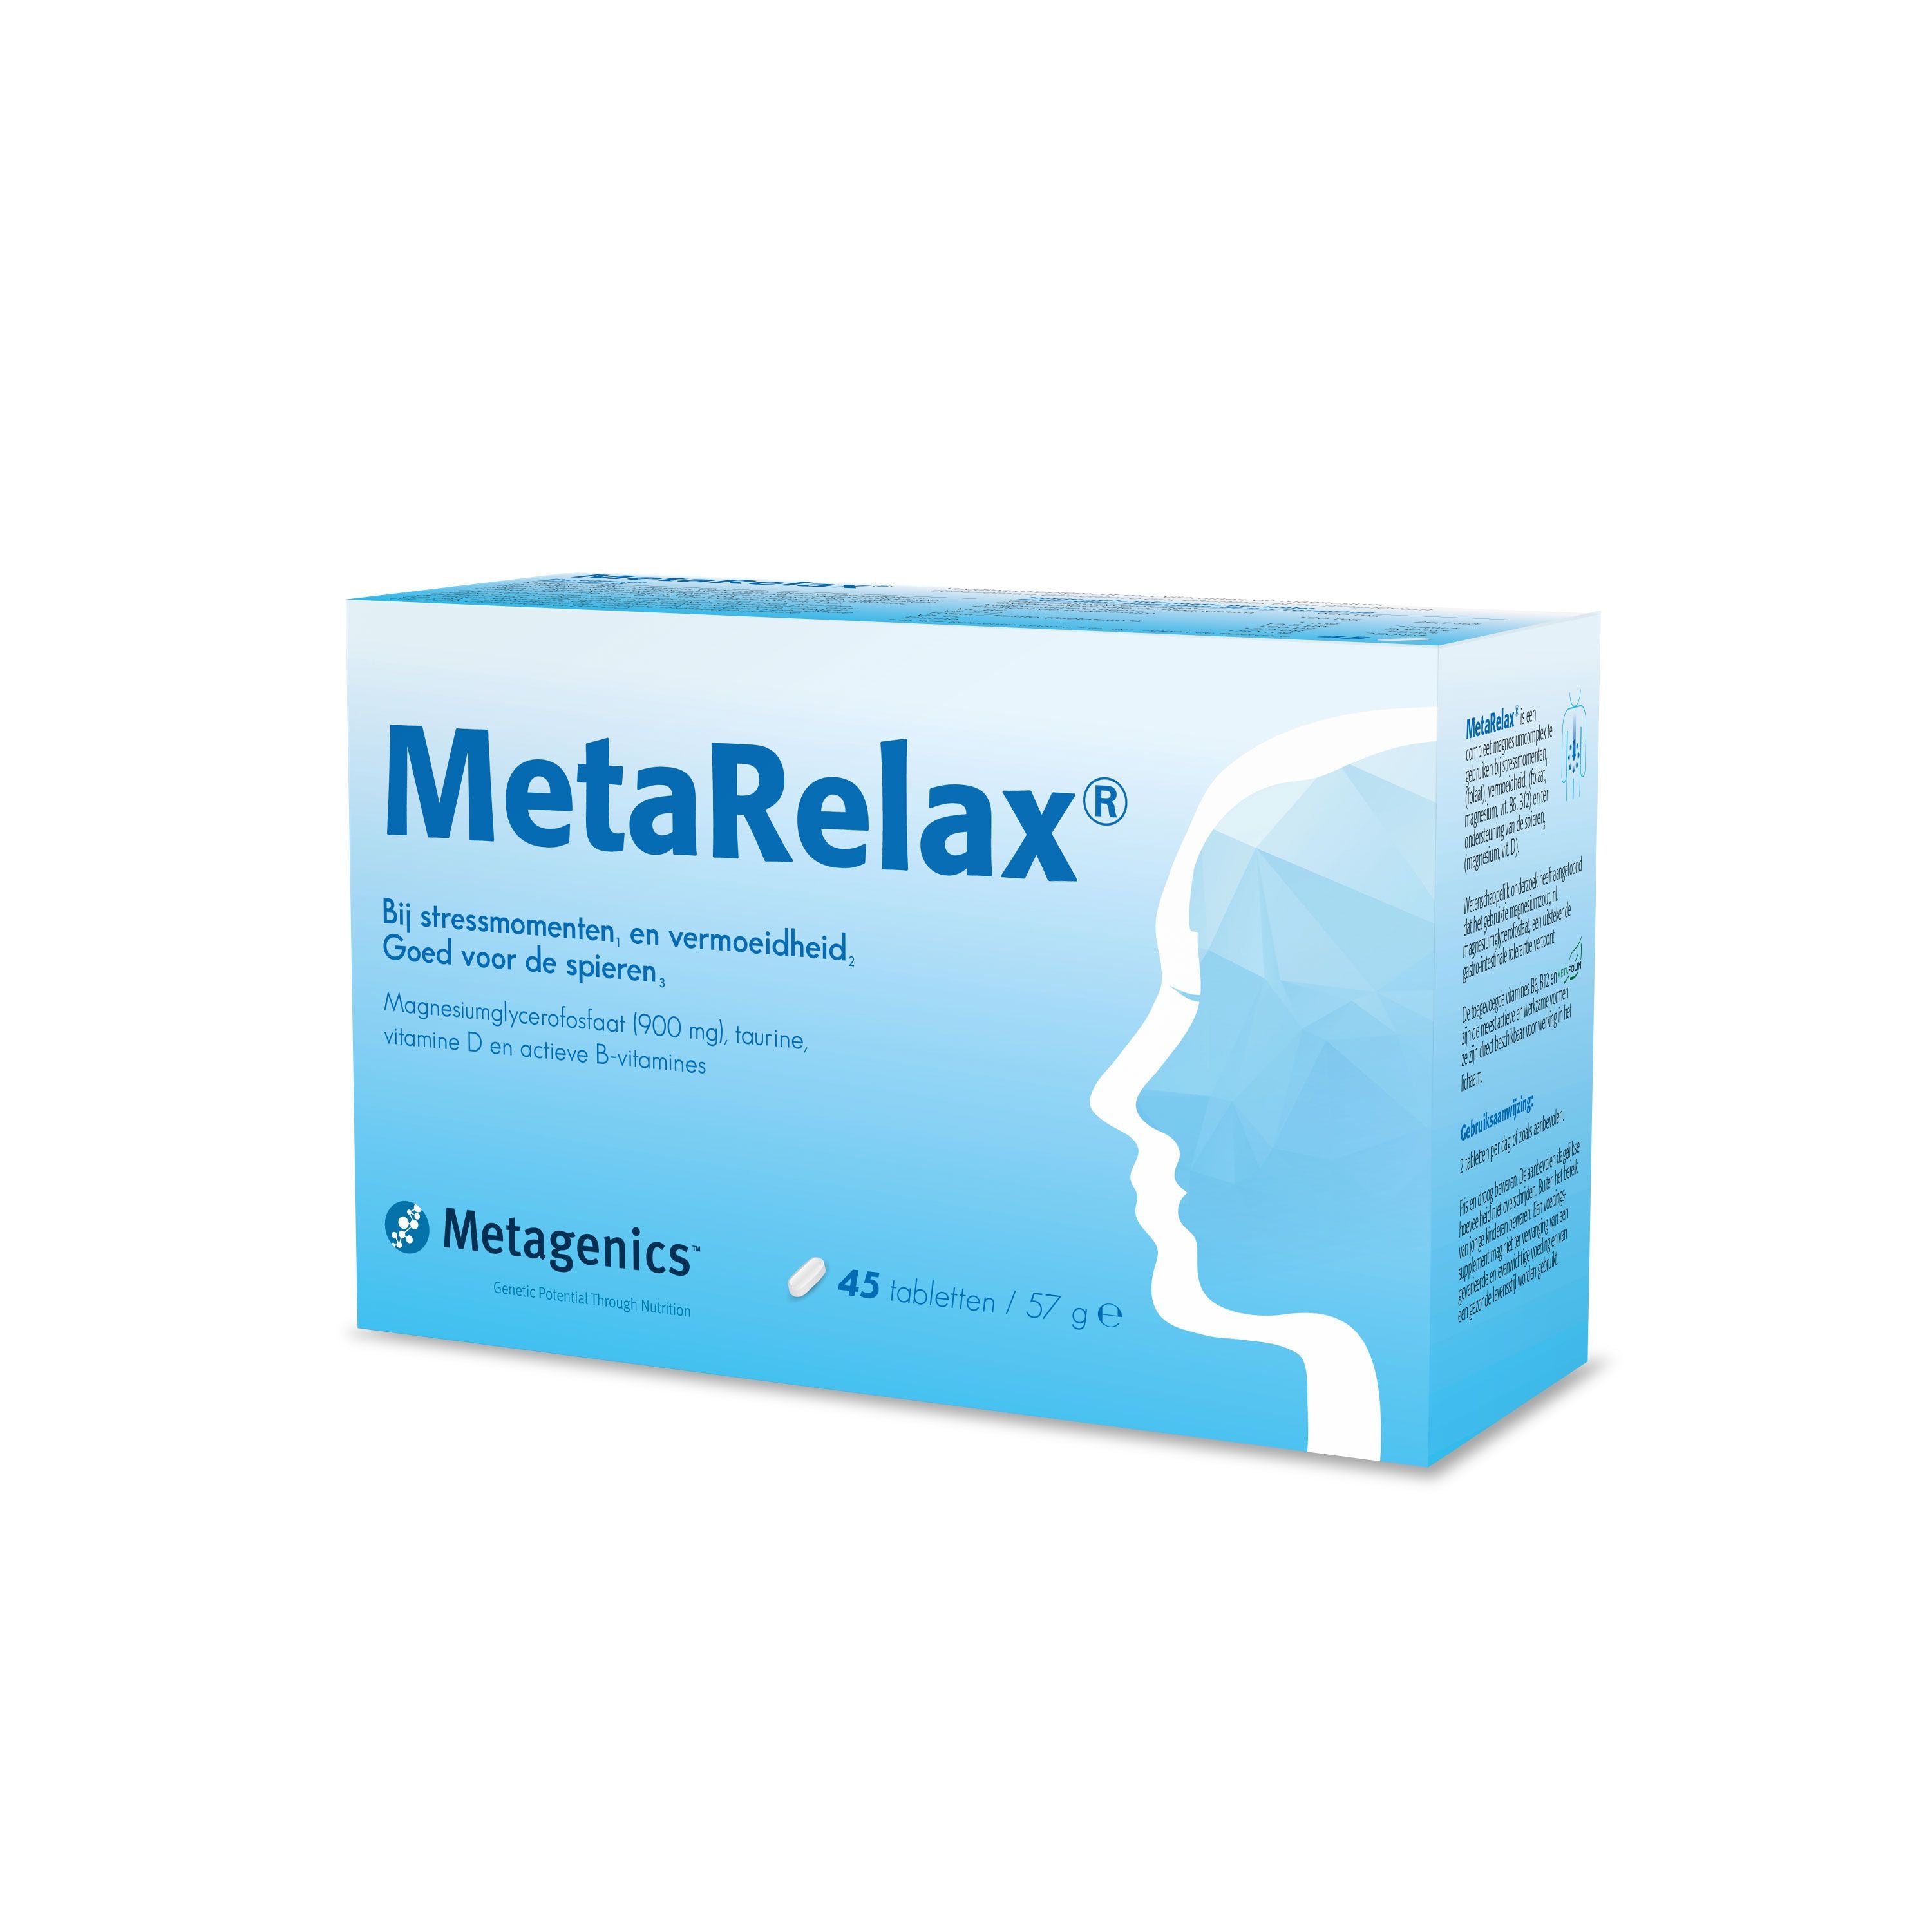 MetaRelax - Stress, fatigue et crampes musculaires